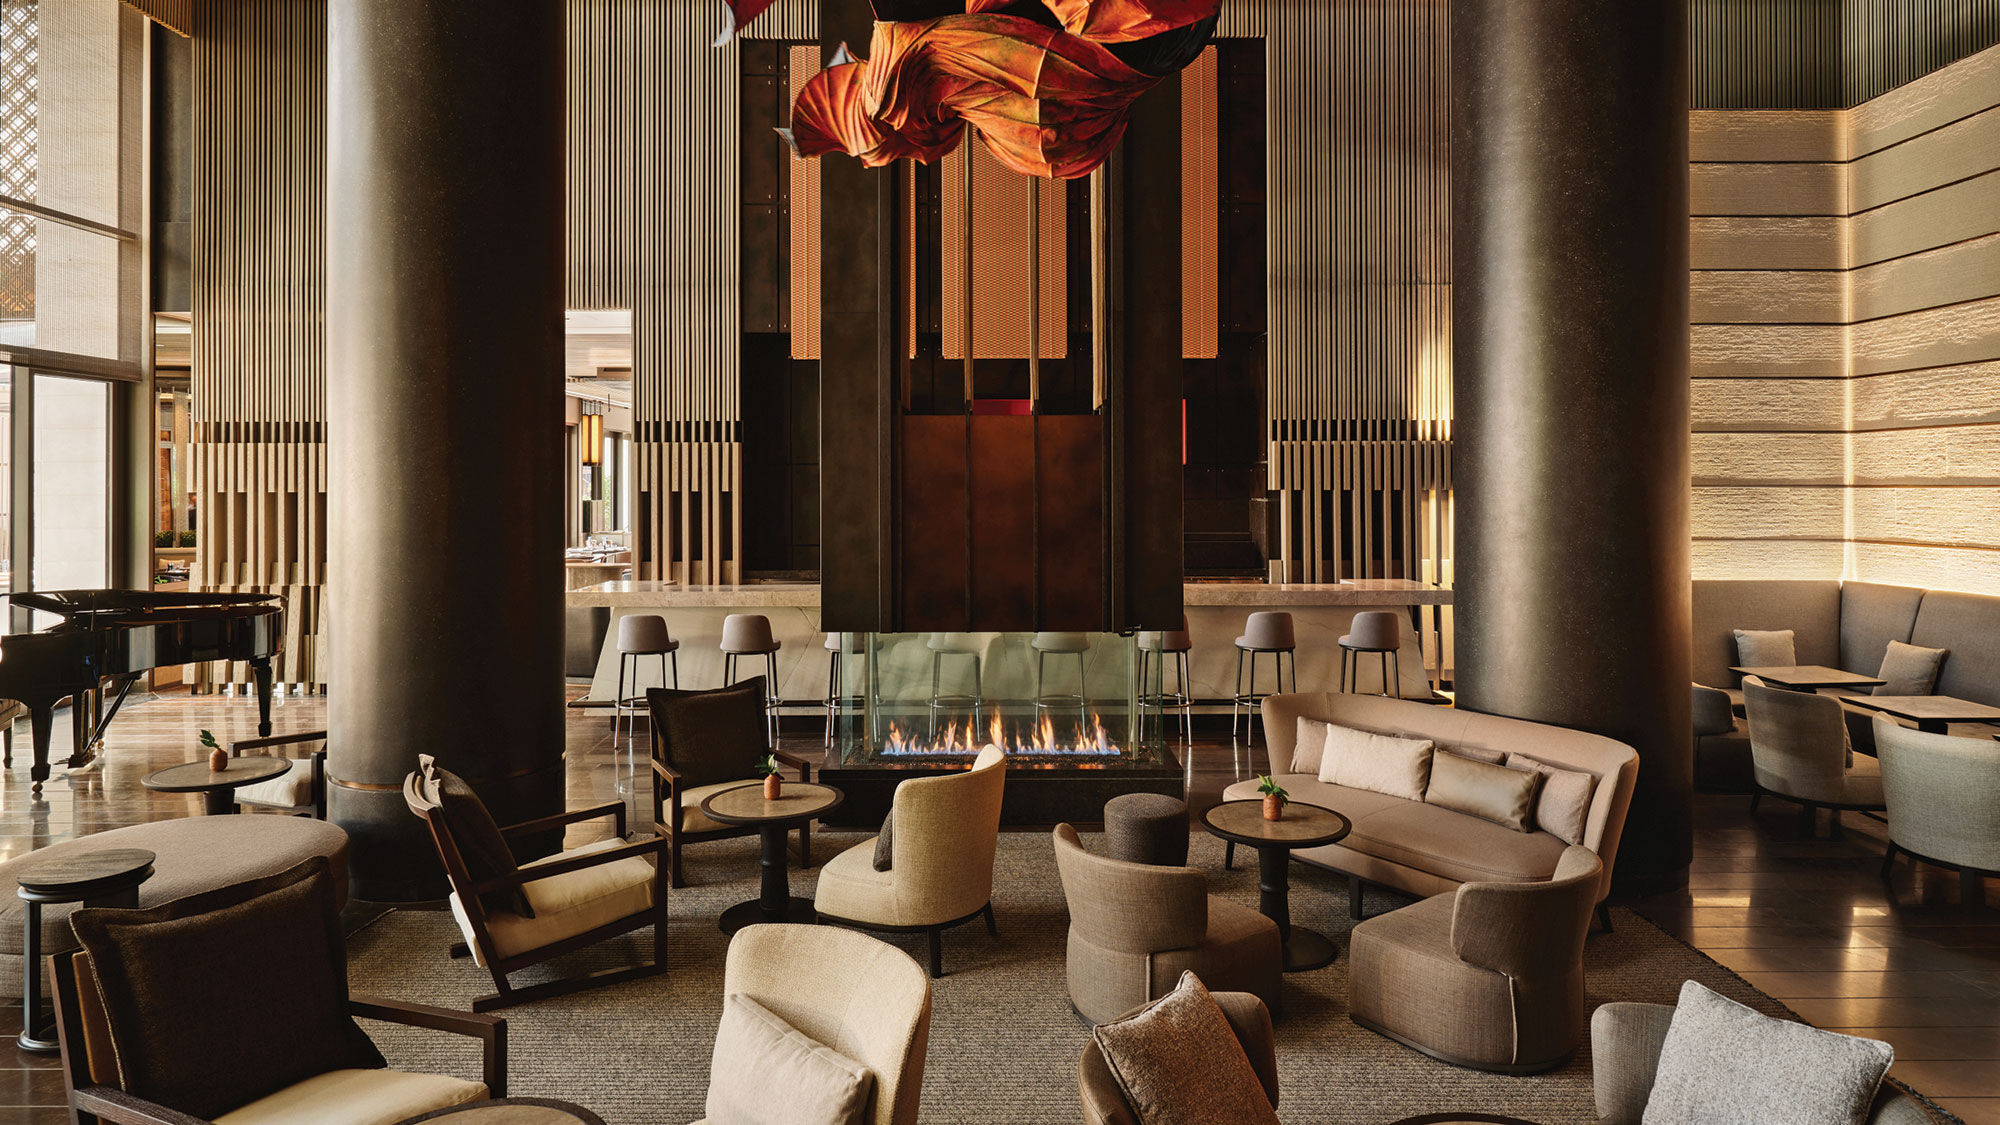 The Lounge Bar at the Aman New York. The hotel opened in the Crown Building on Fifth Avenue and 57th Street in midtown Manhattan.